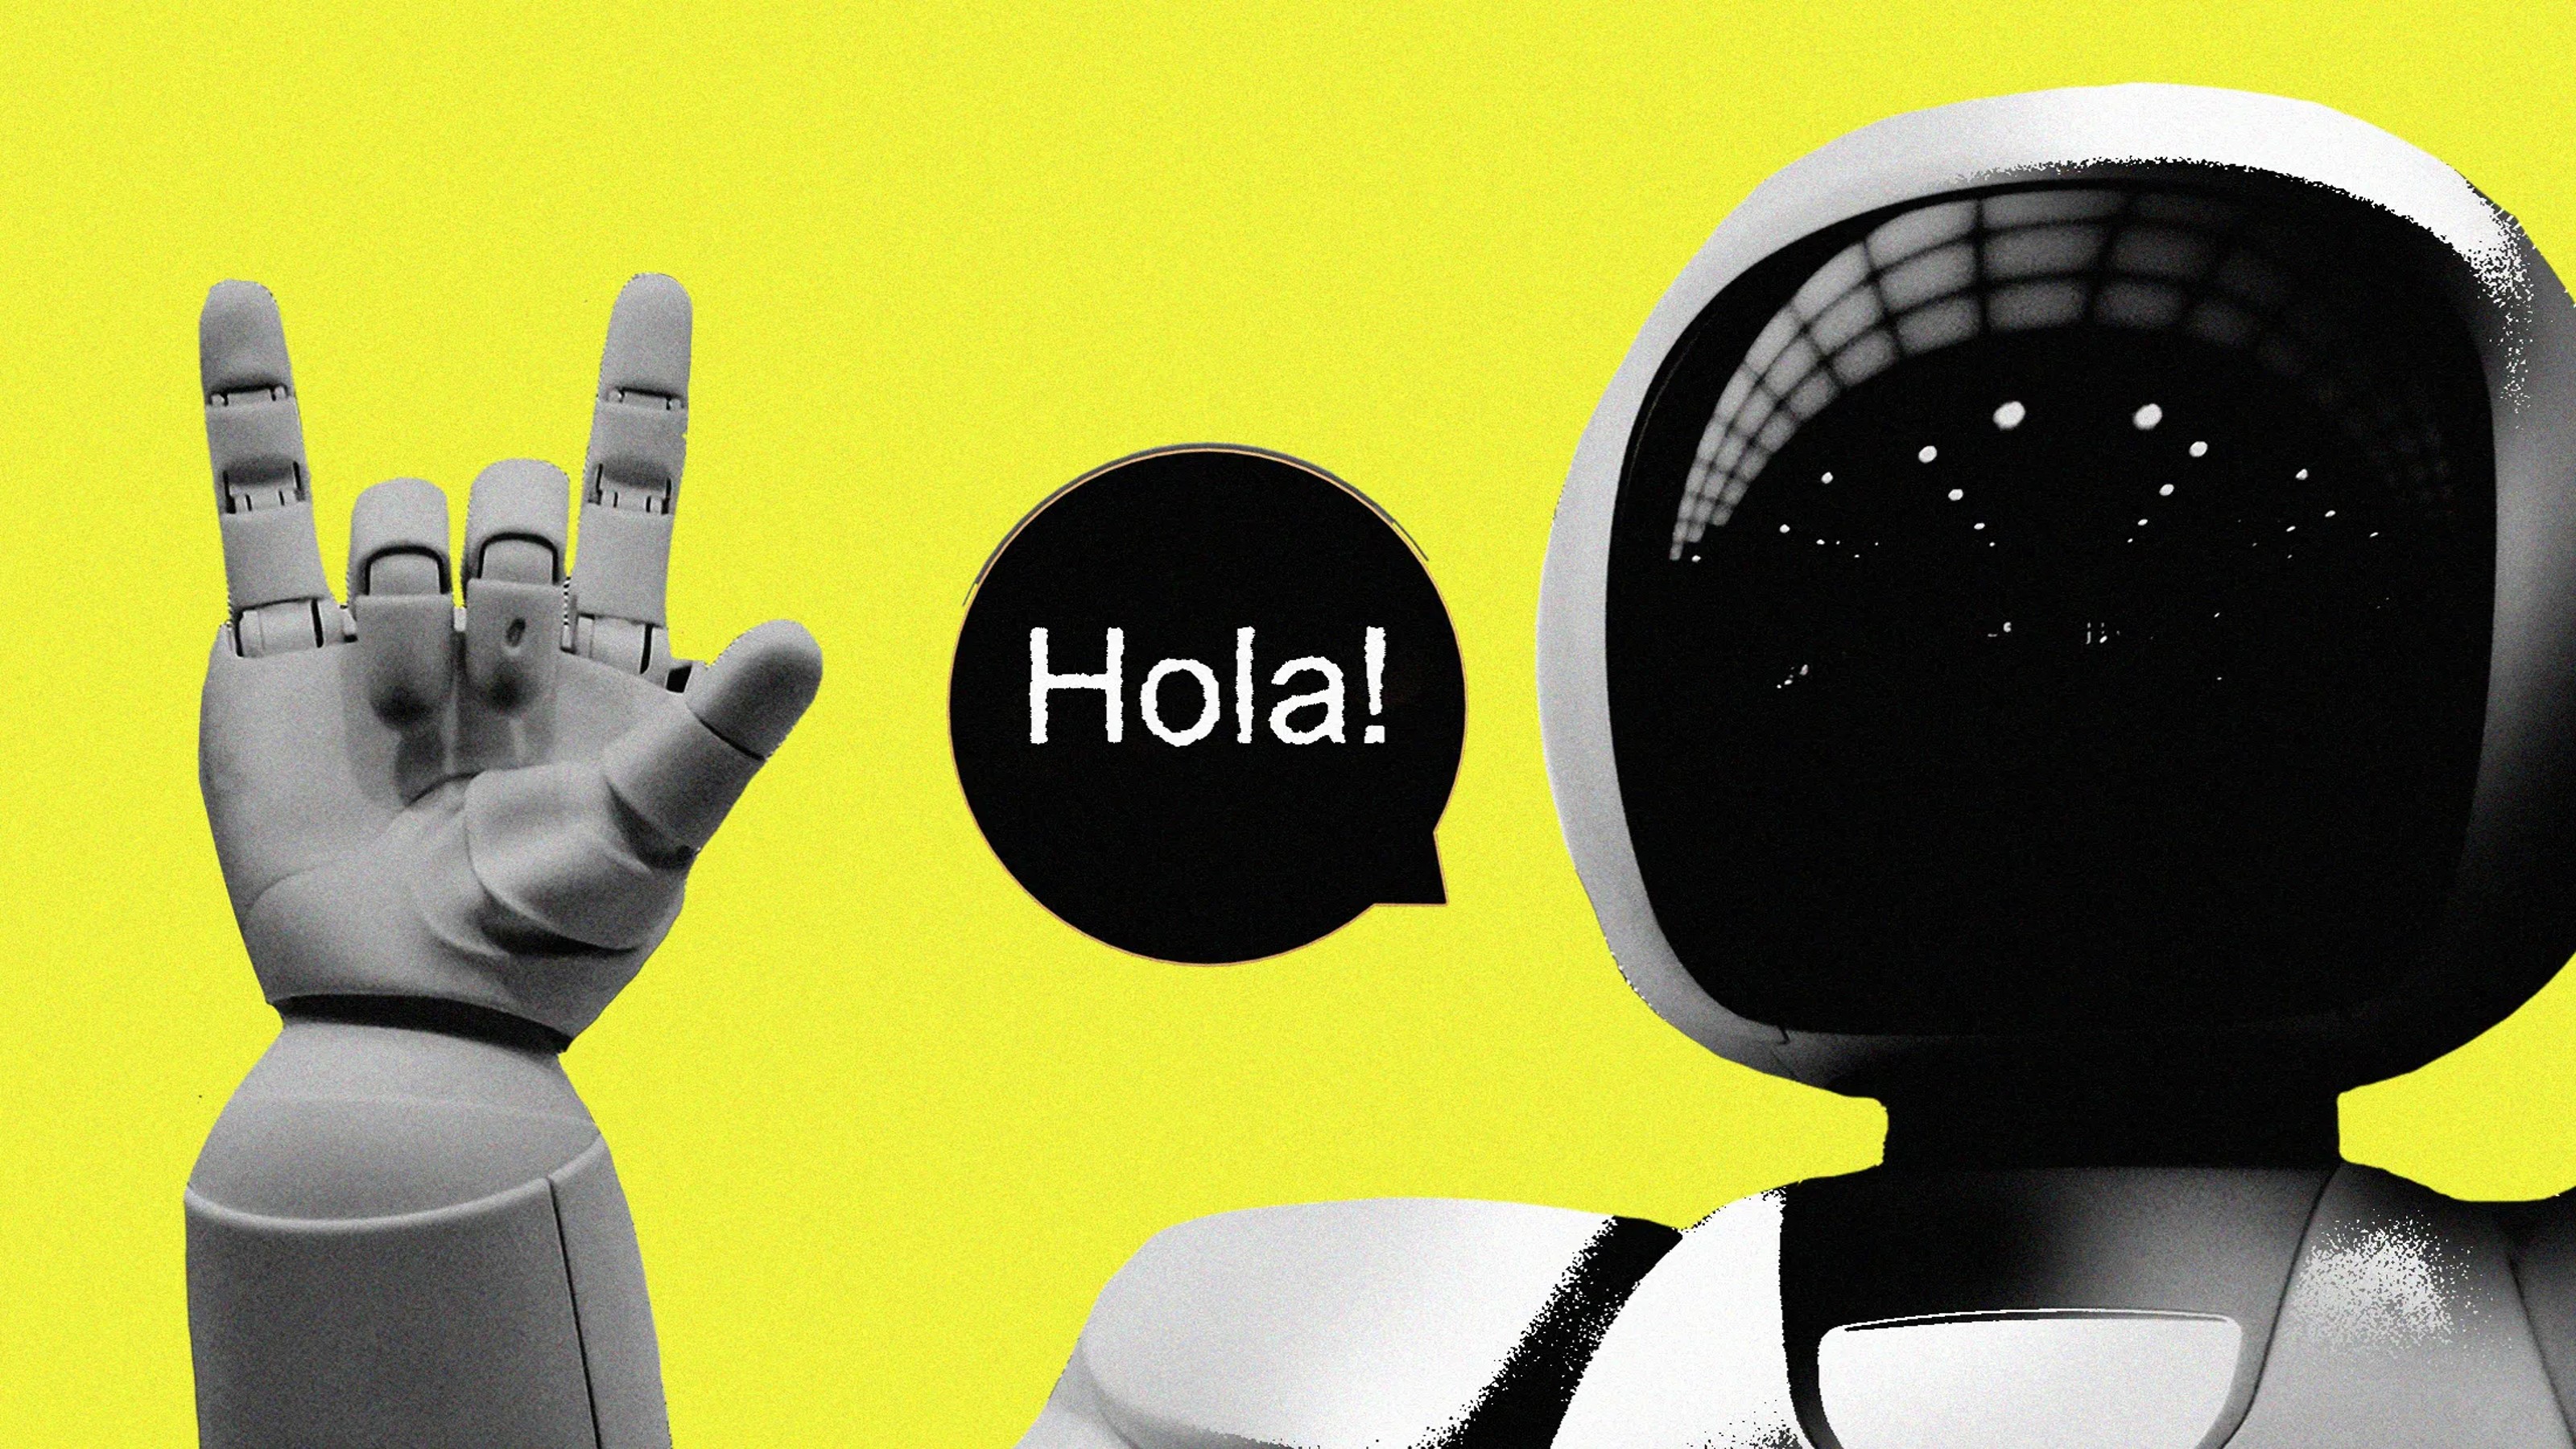 A robot is making a rock hand gesture with the word hola.